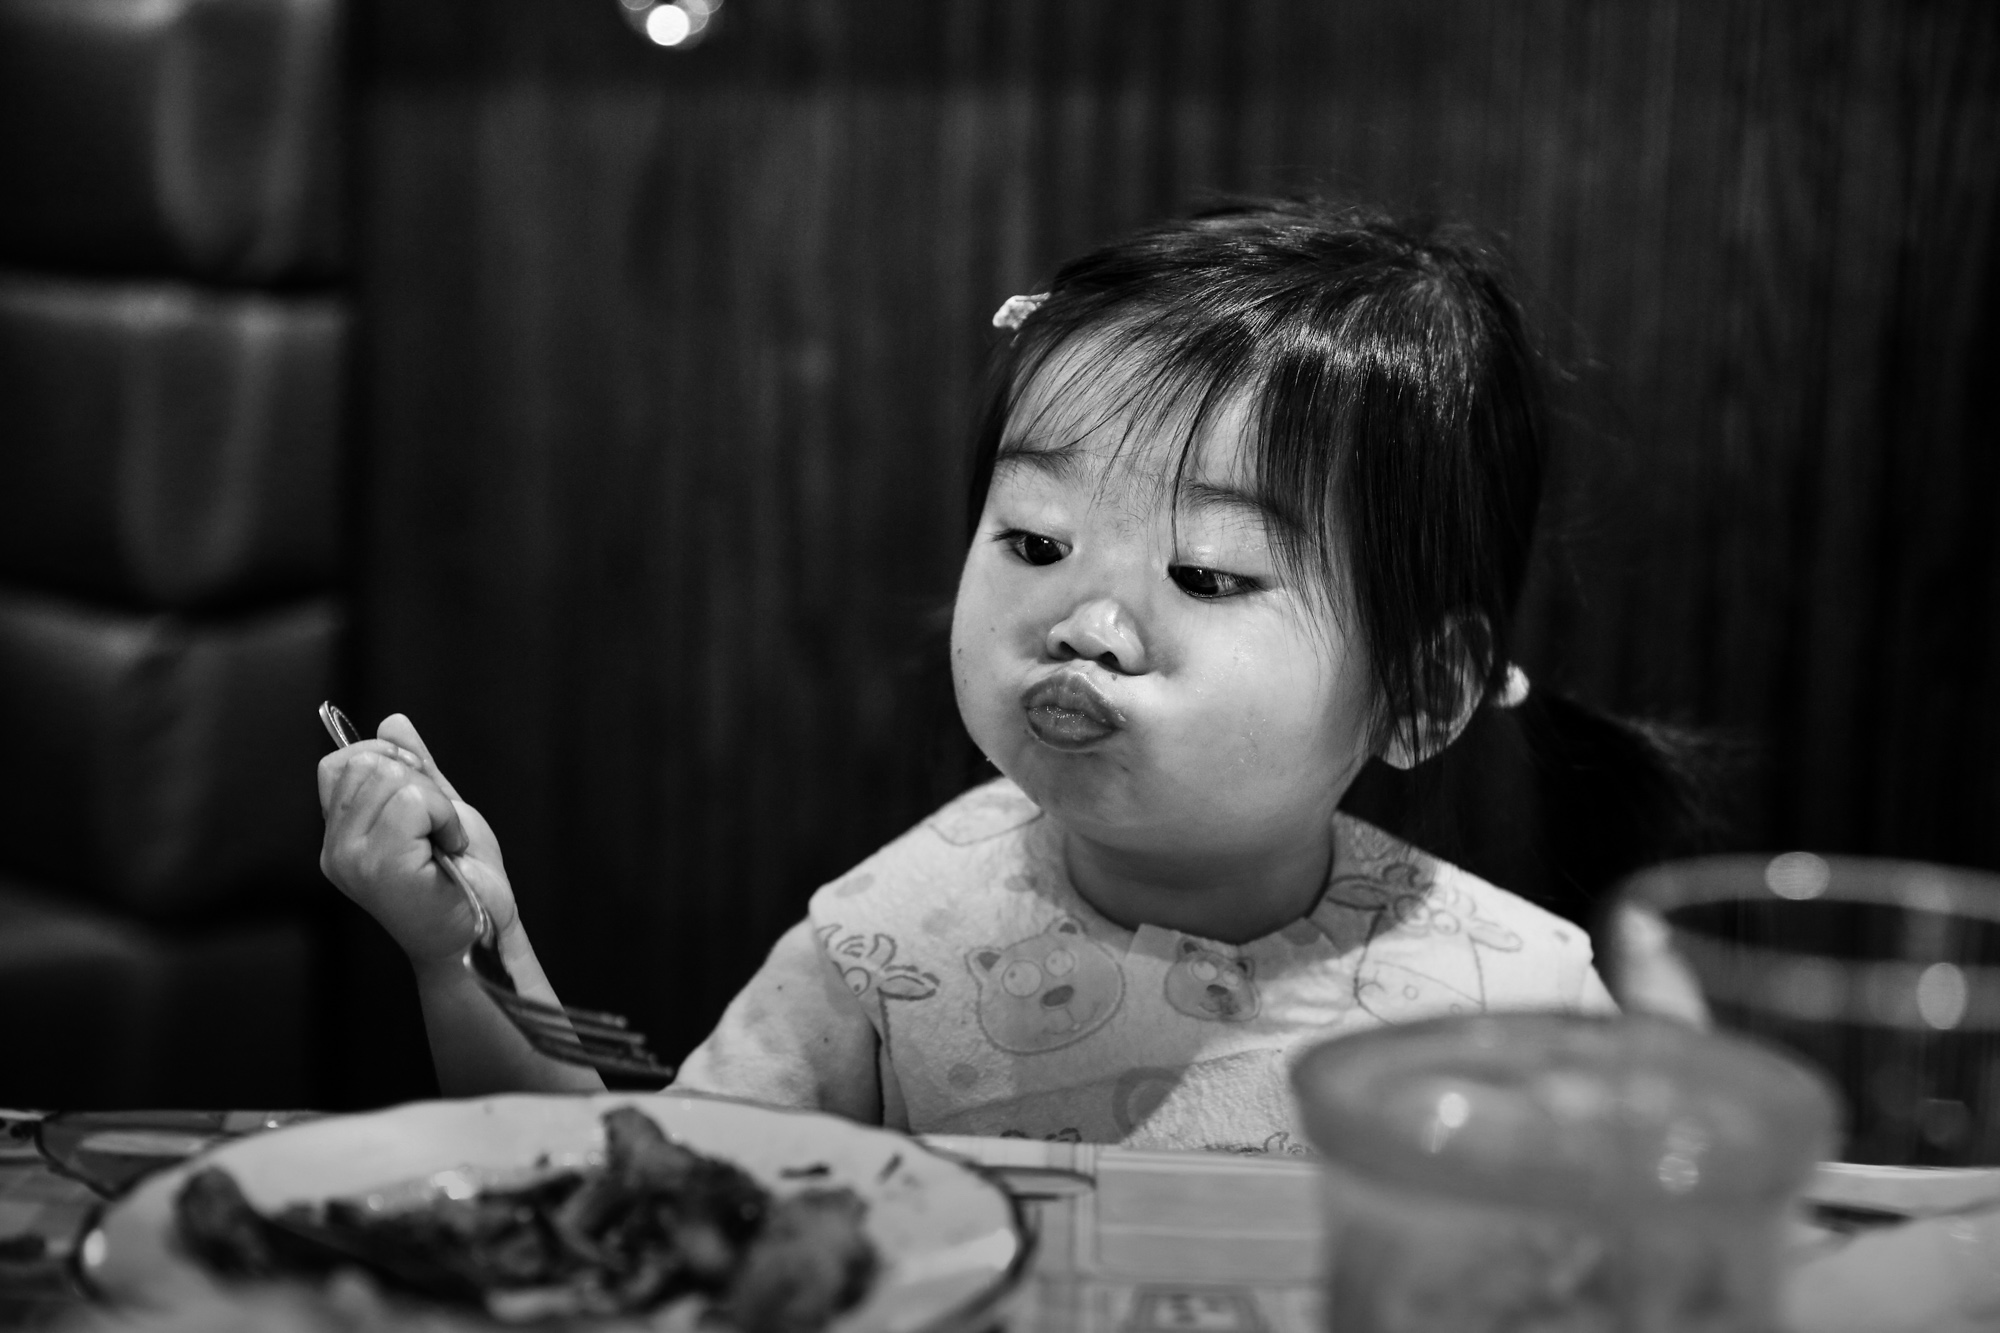 Girl puffs her cheeks out while looking at her food on a plate